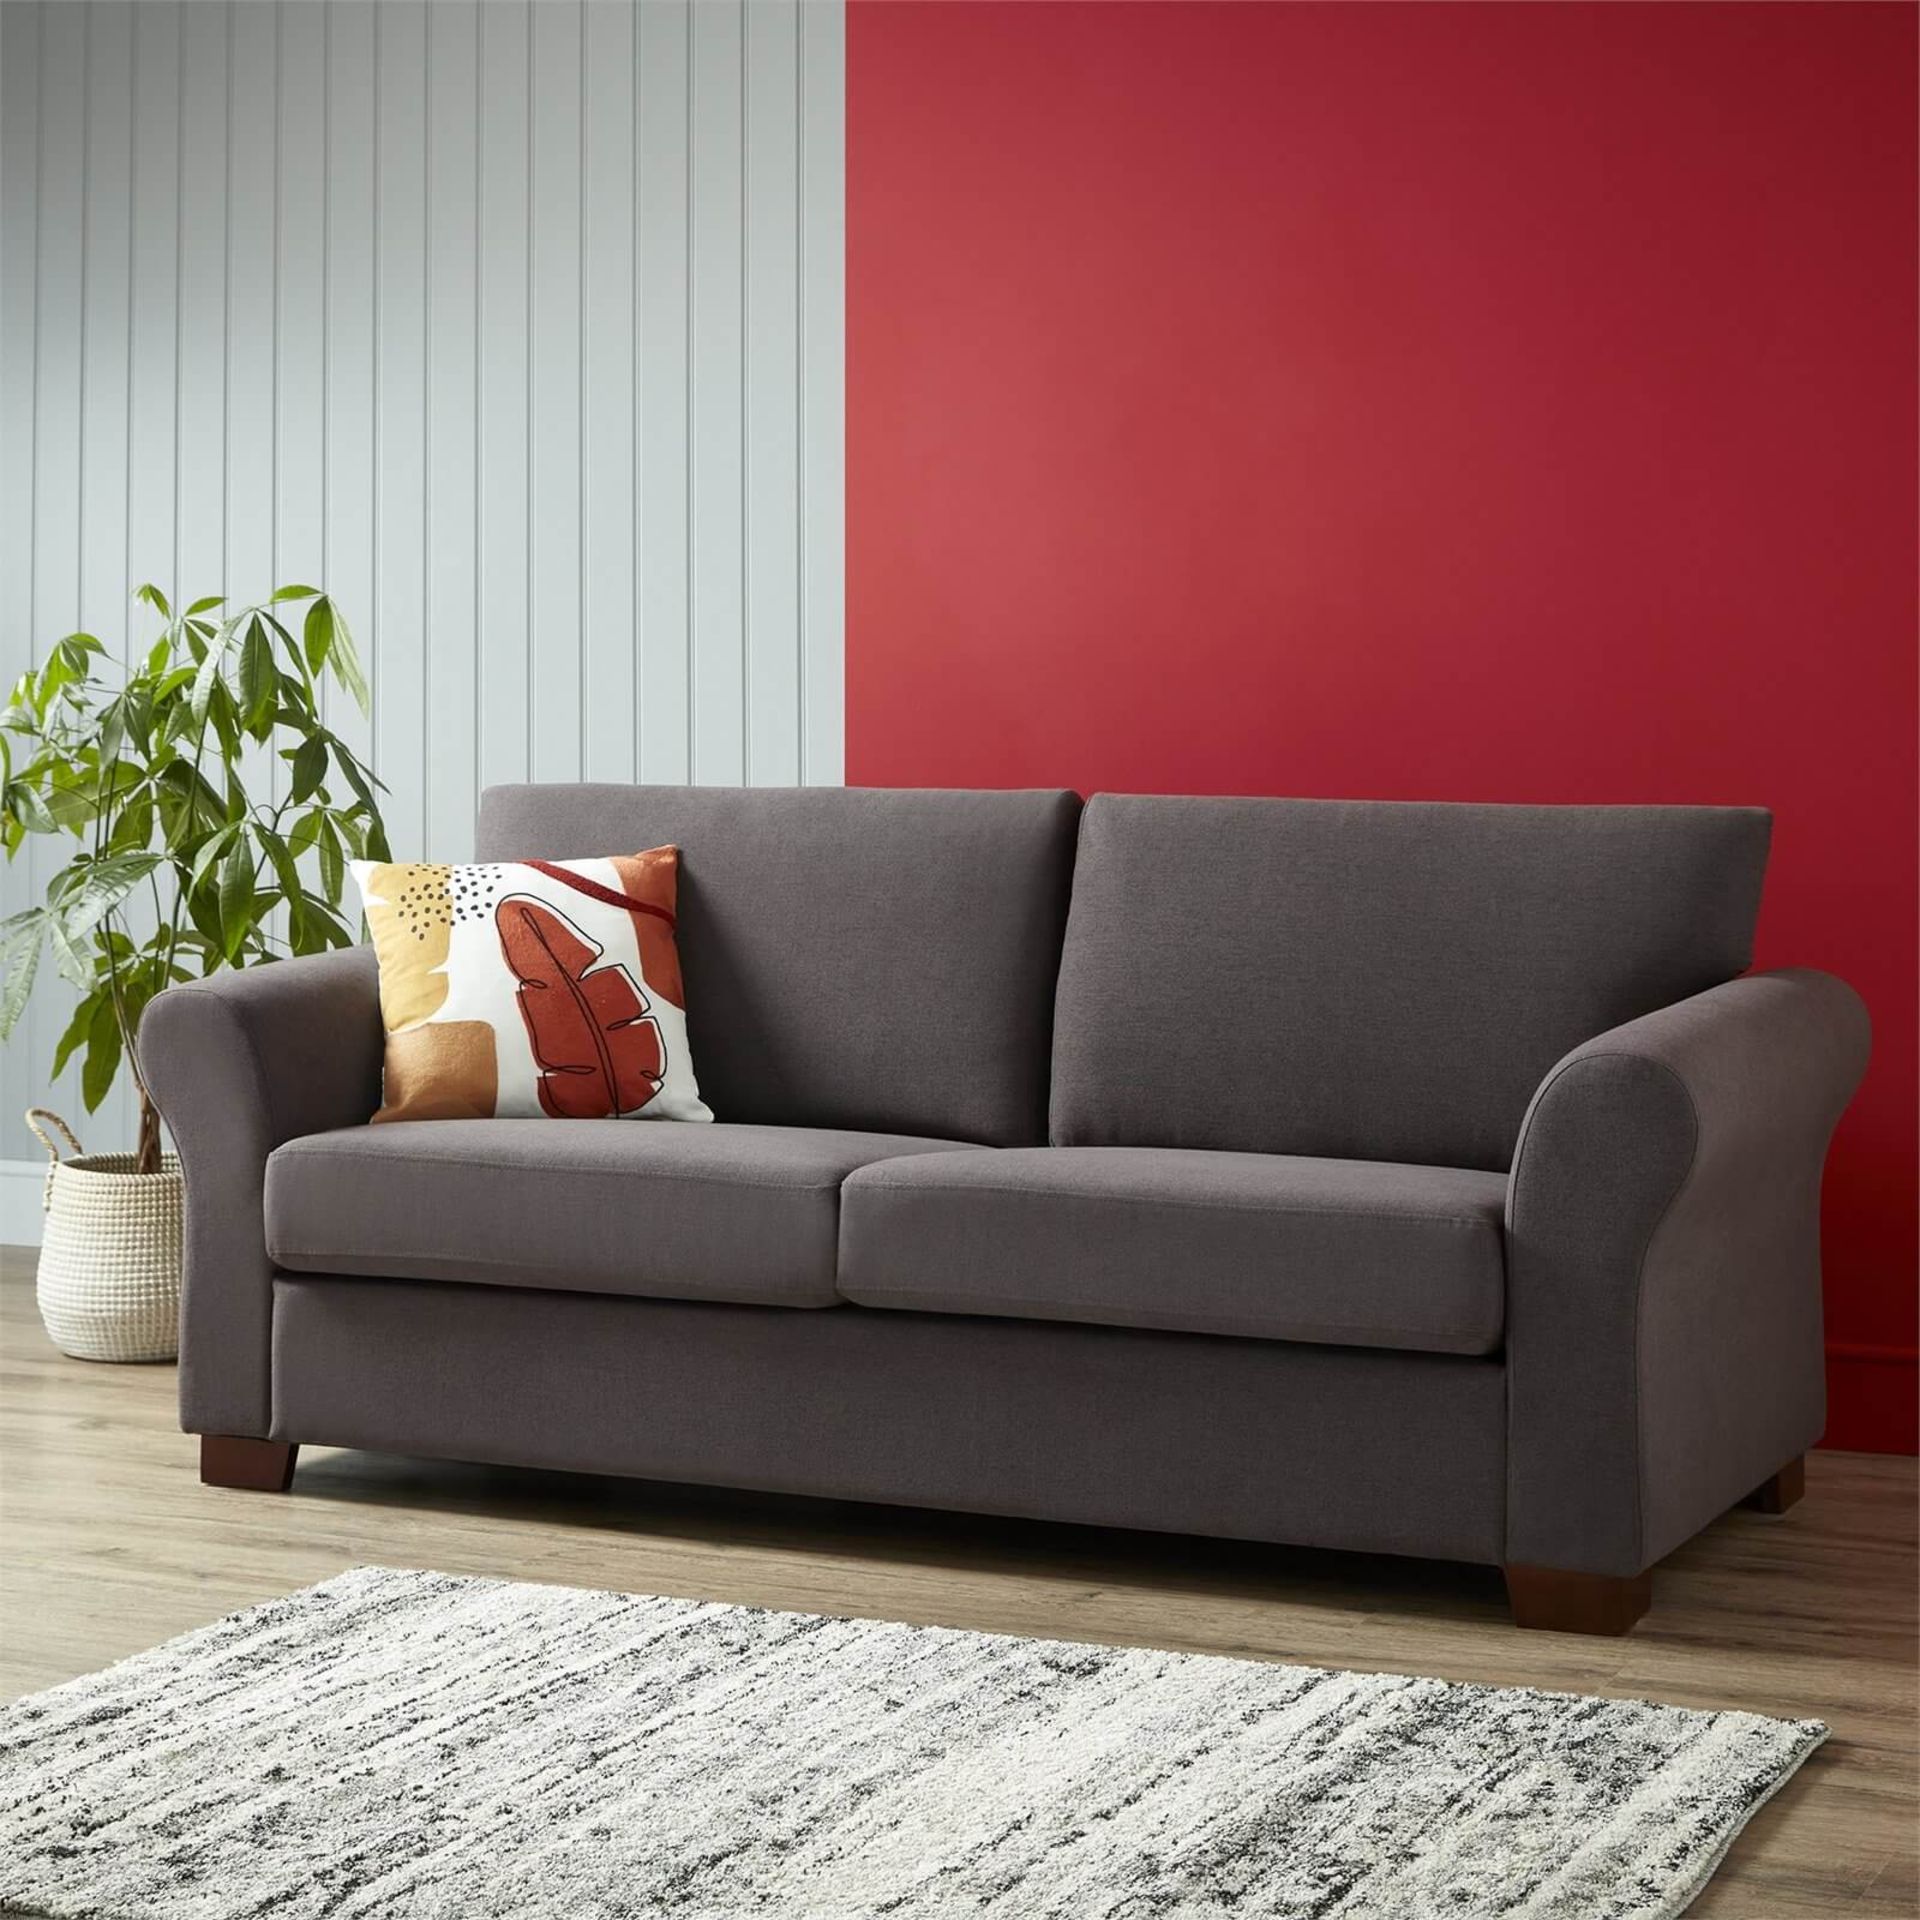 (R7P) 1 X Hayley Sofa Charcoal 3 Seater Sofa, Wooden Frame With Solid Beechwood Legs. 100% Polyest